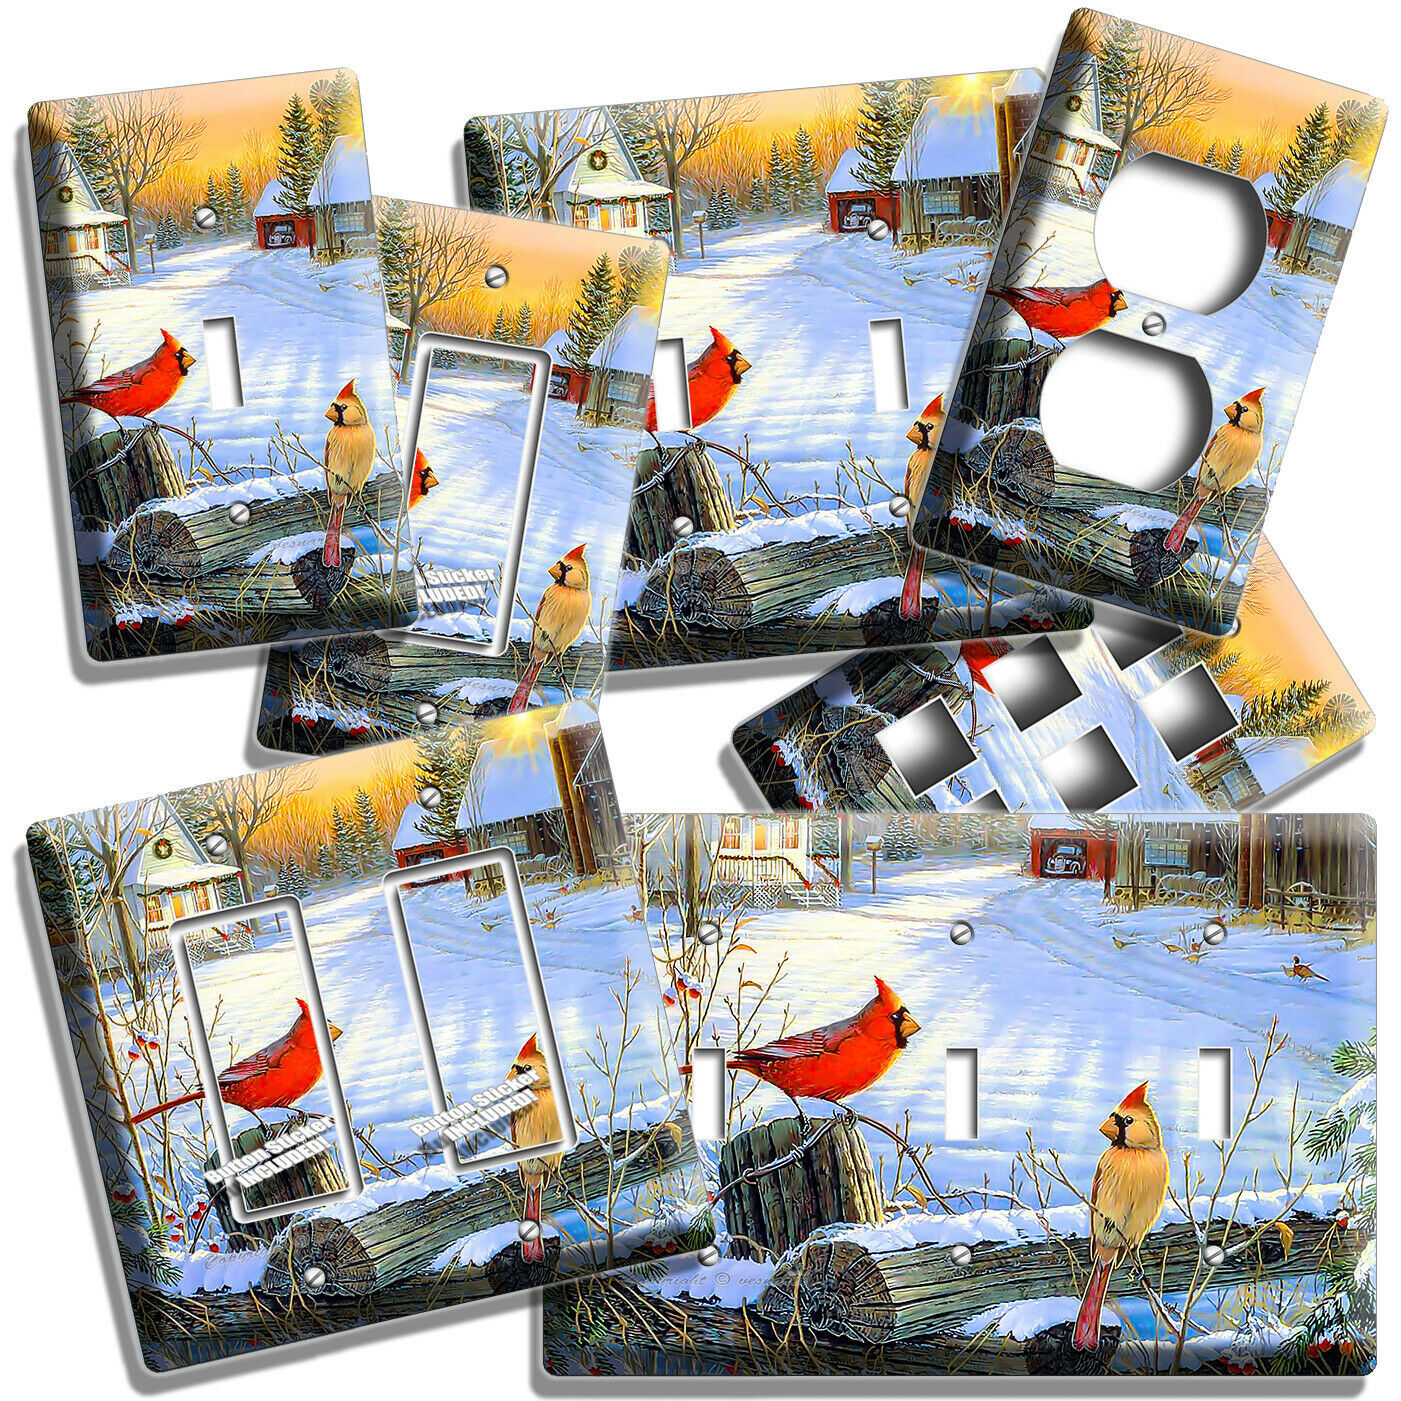 CARDINAL BIRDS CONTRY WINTER MORNING LIGHT SWITCH OUTLET WALL PLATES ROOM DECOR - $16.19 - $26.09